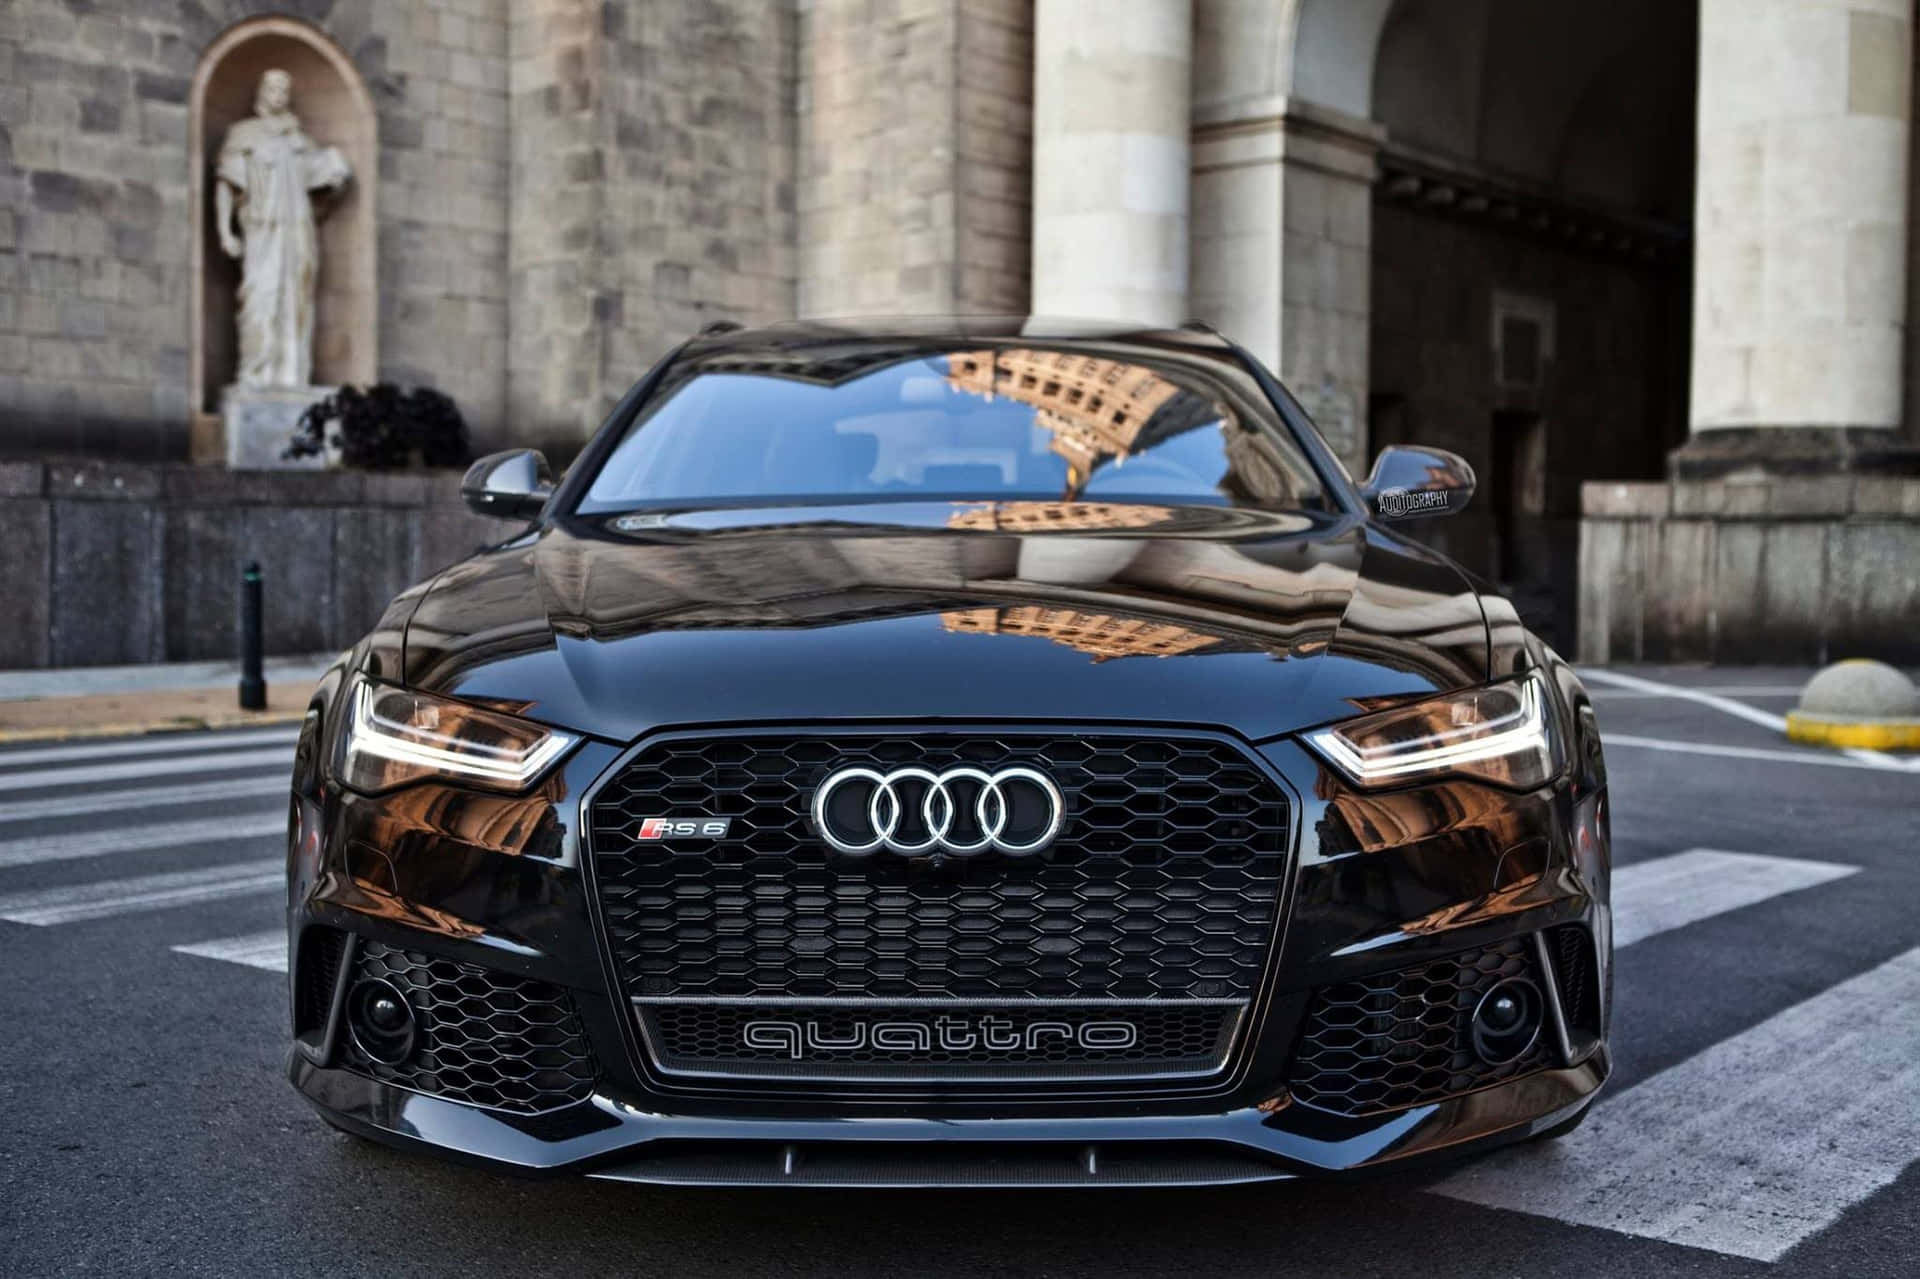 Captivating Audi RS6 Performance in Action Wallpaper